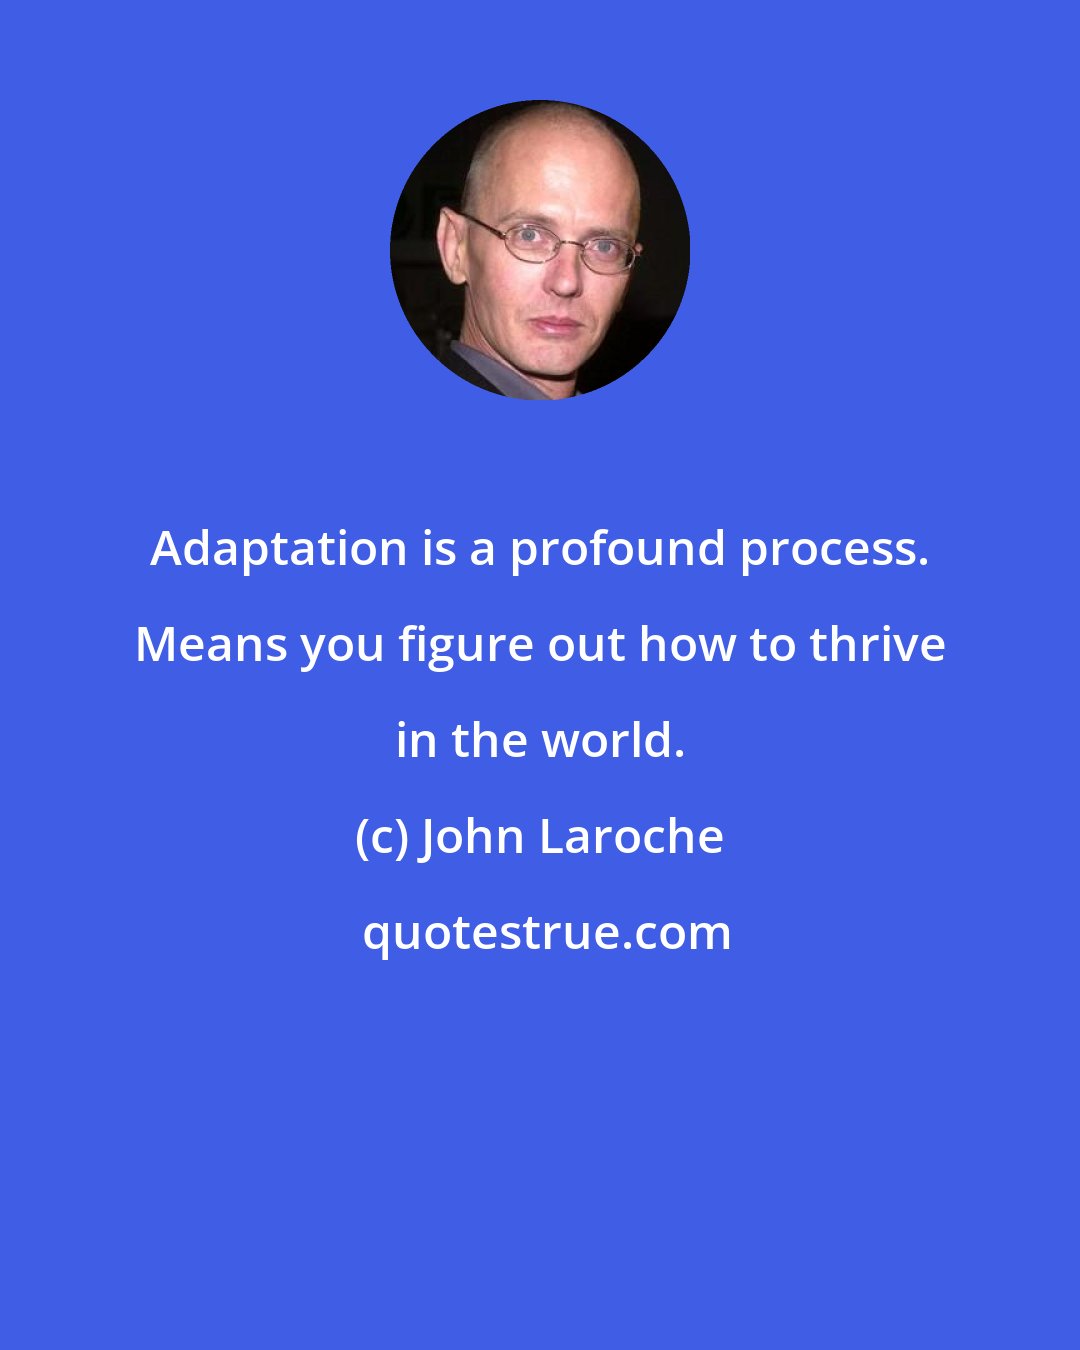 John Laroche: Adaptation is a profound process. Means you figure out how to thrive in the world.